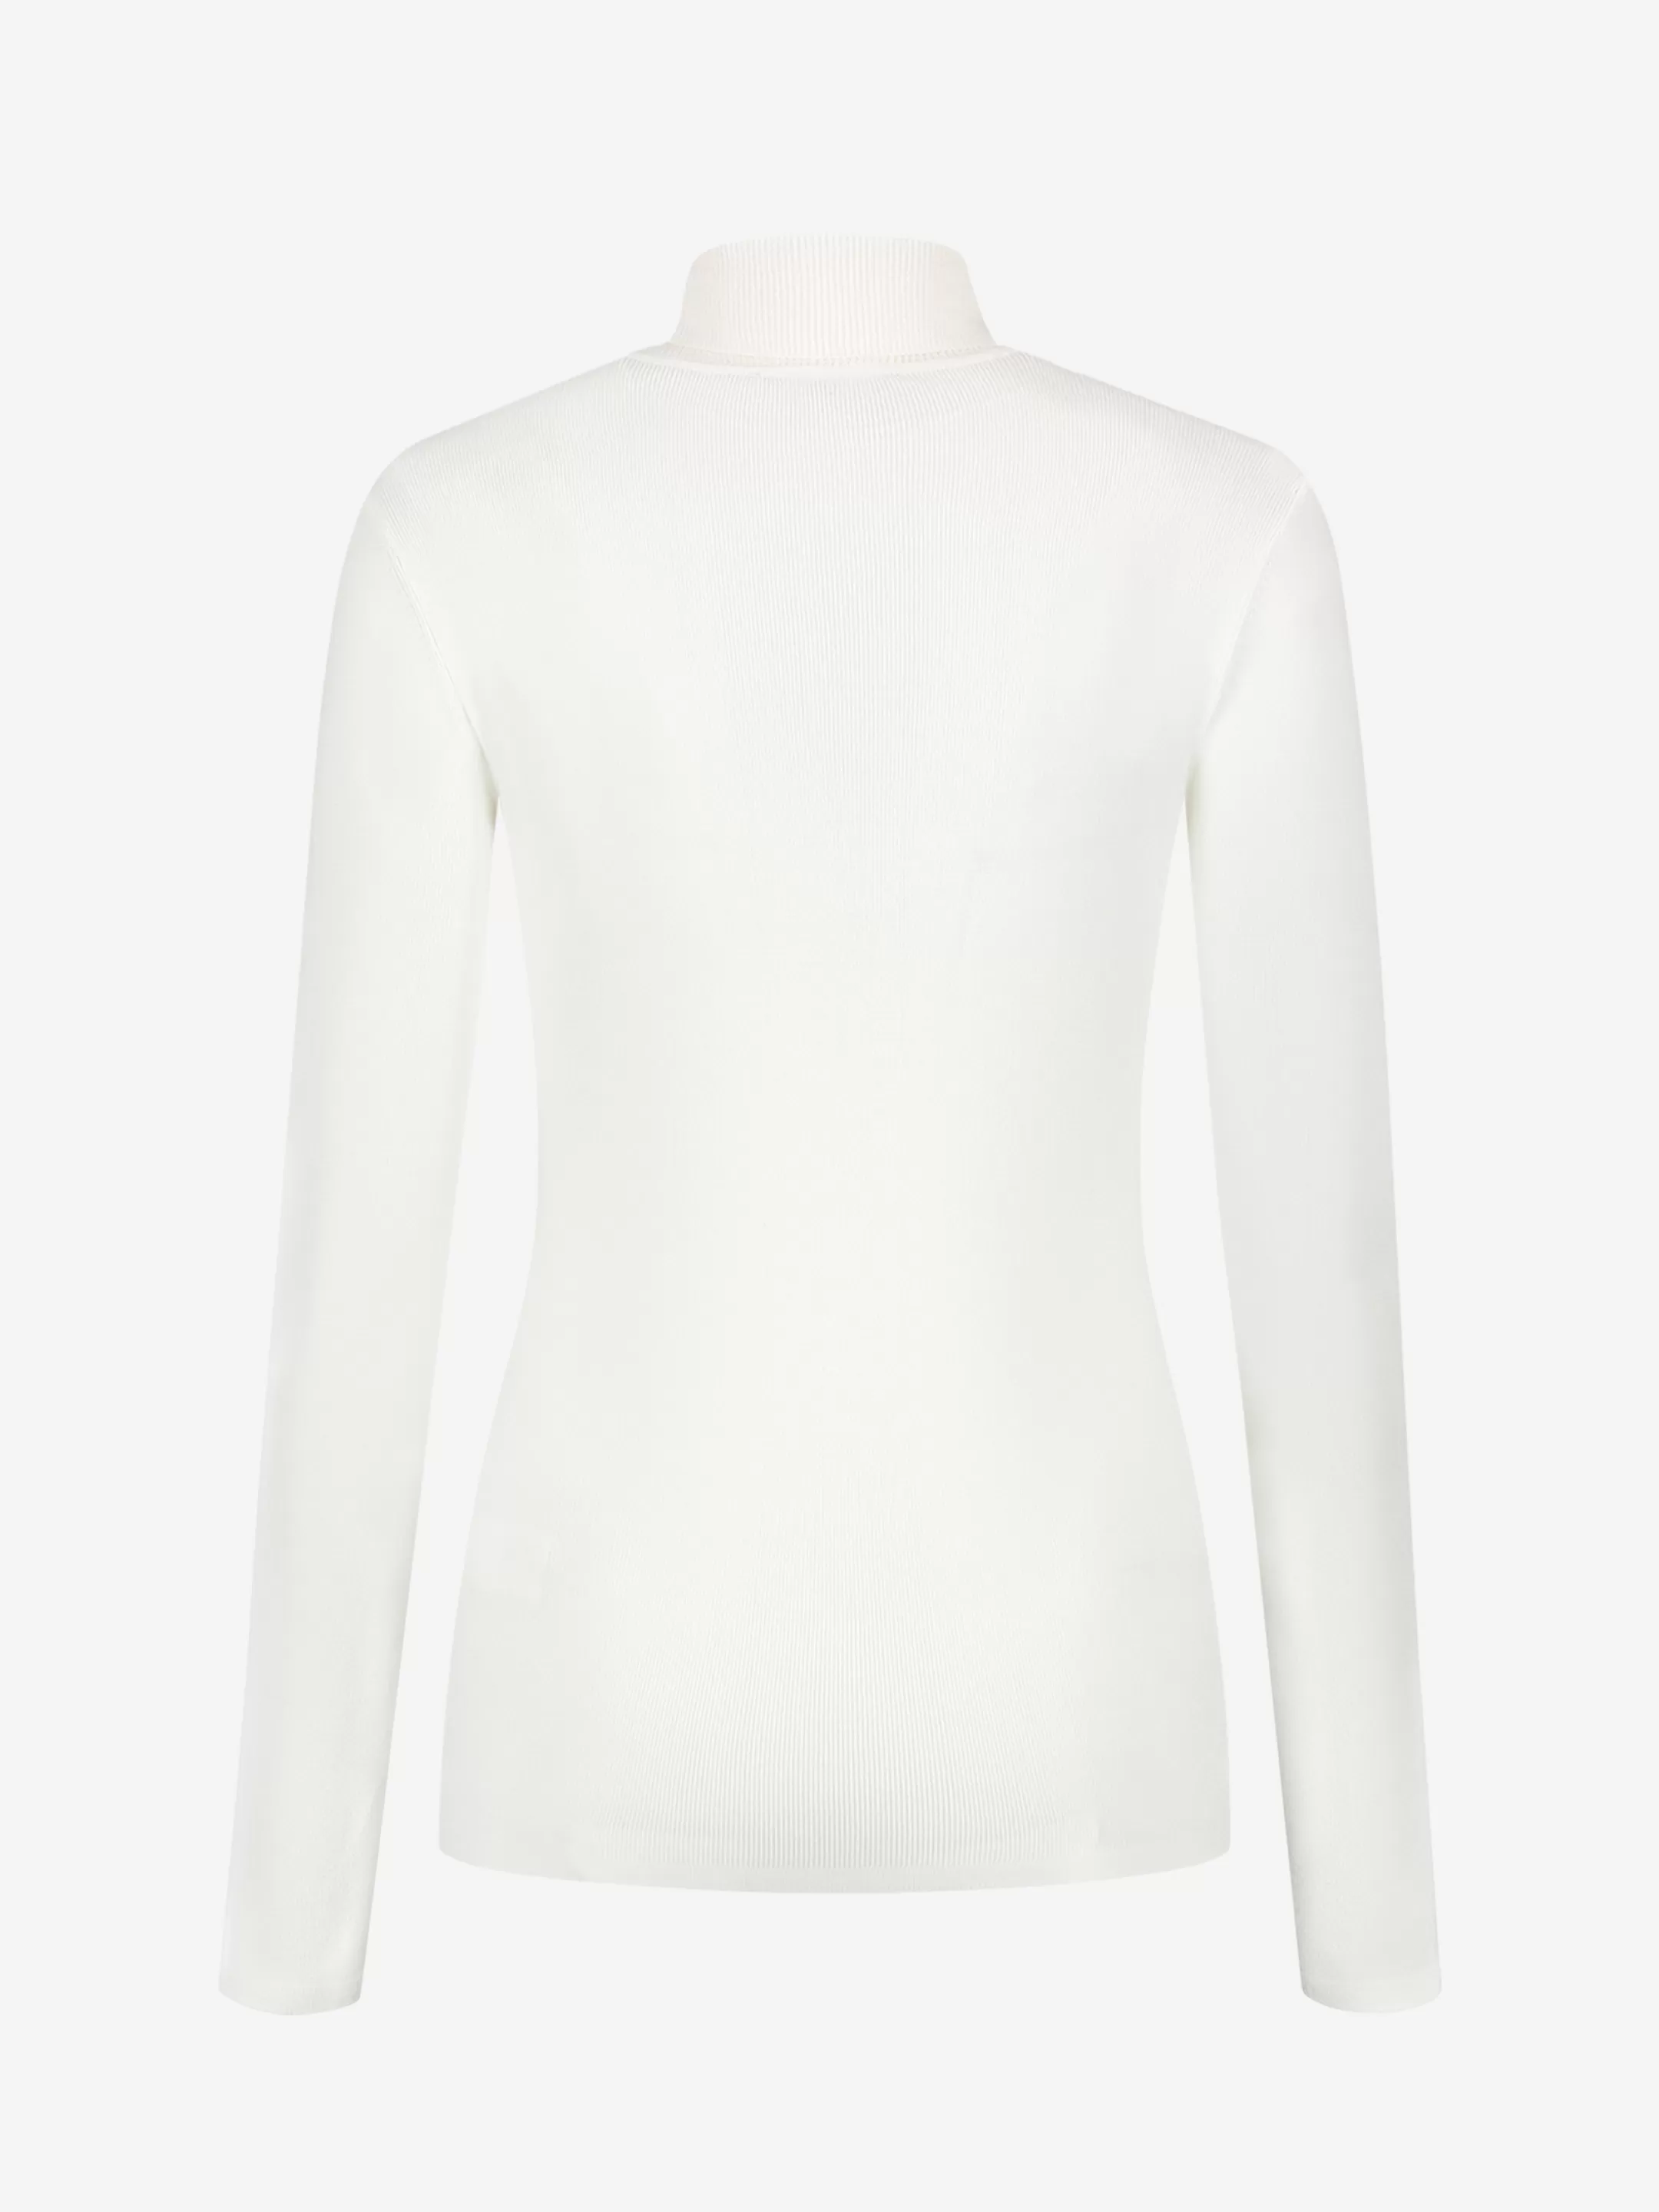 Cheap FITTED TOP MET COL Basics | Tops